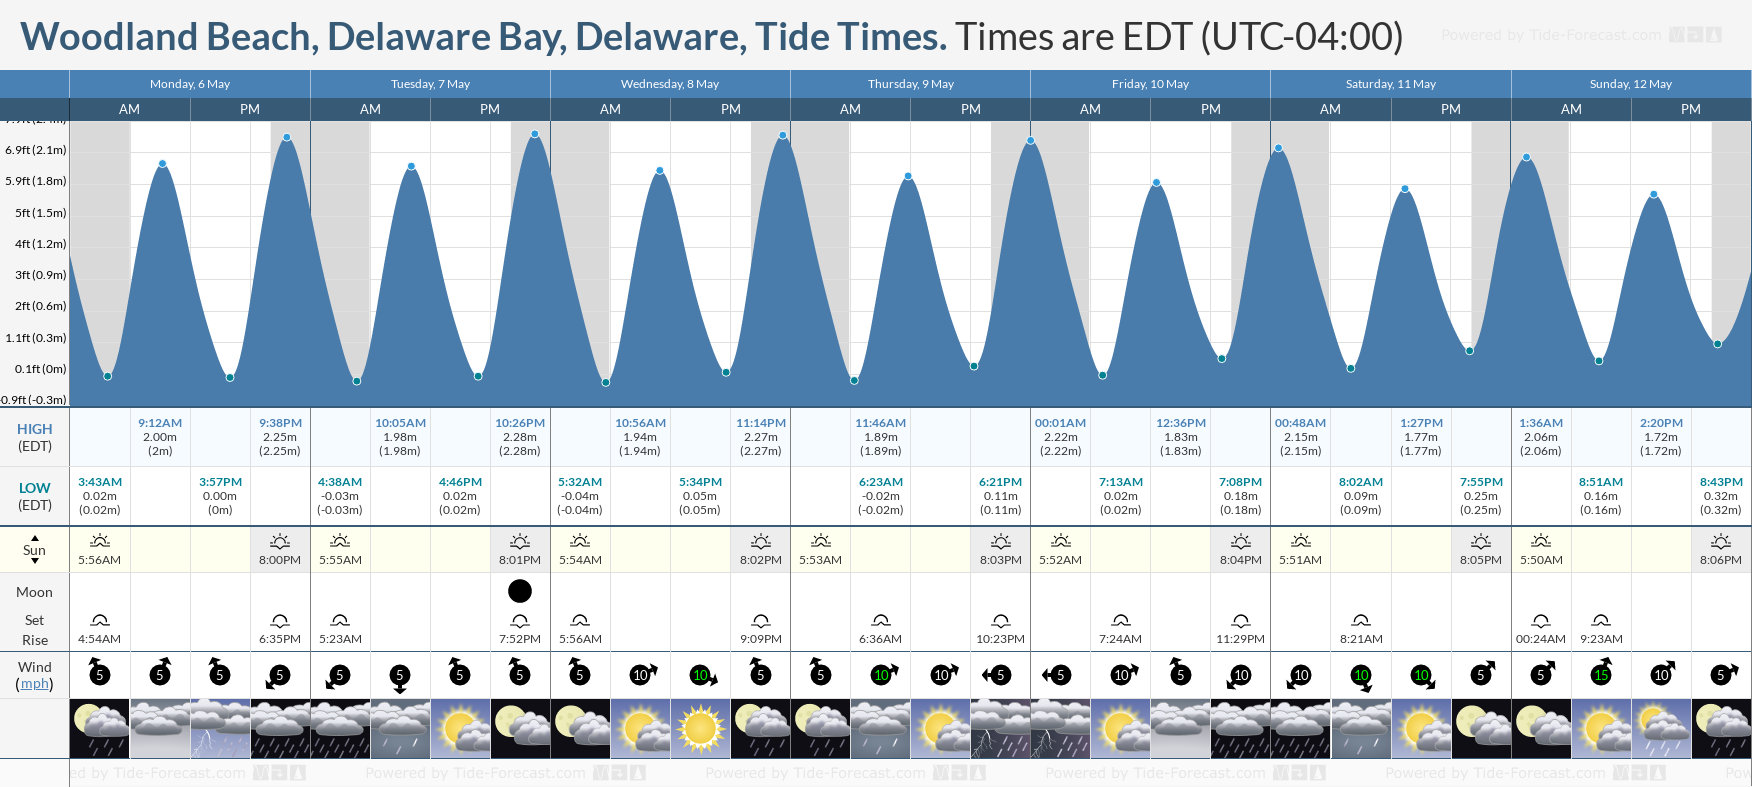 Woodland Beach, Delaware Bay, Delaware Tide Chart including high and low tide tide times for the next 7 days